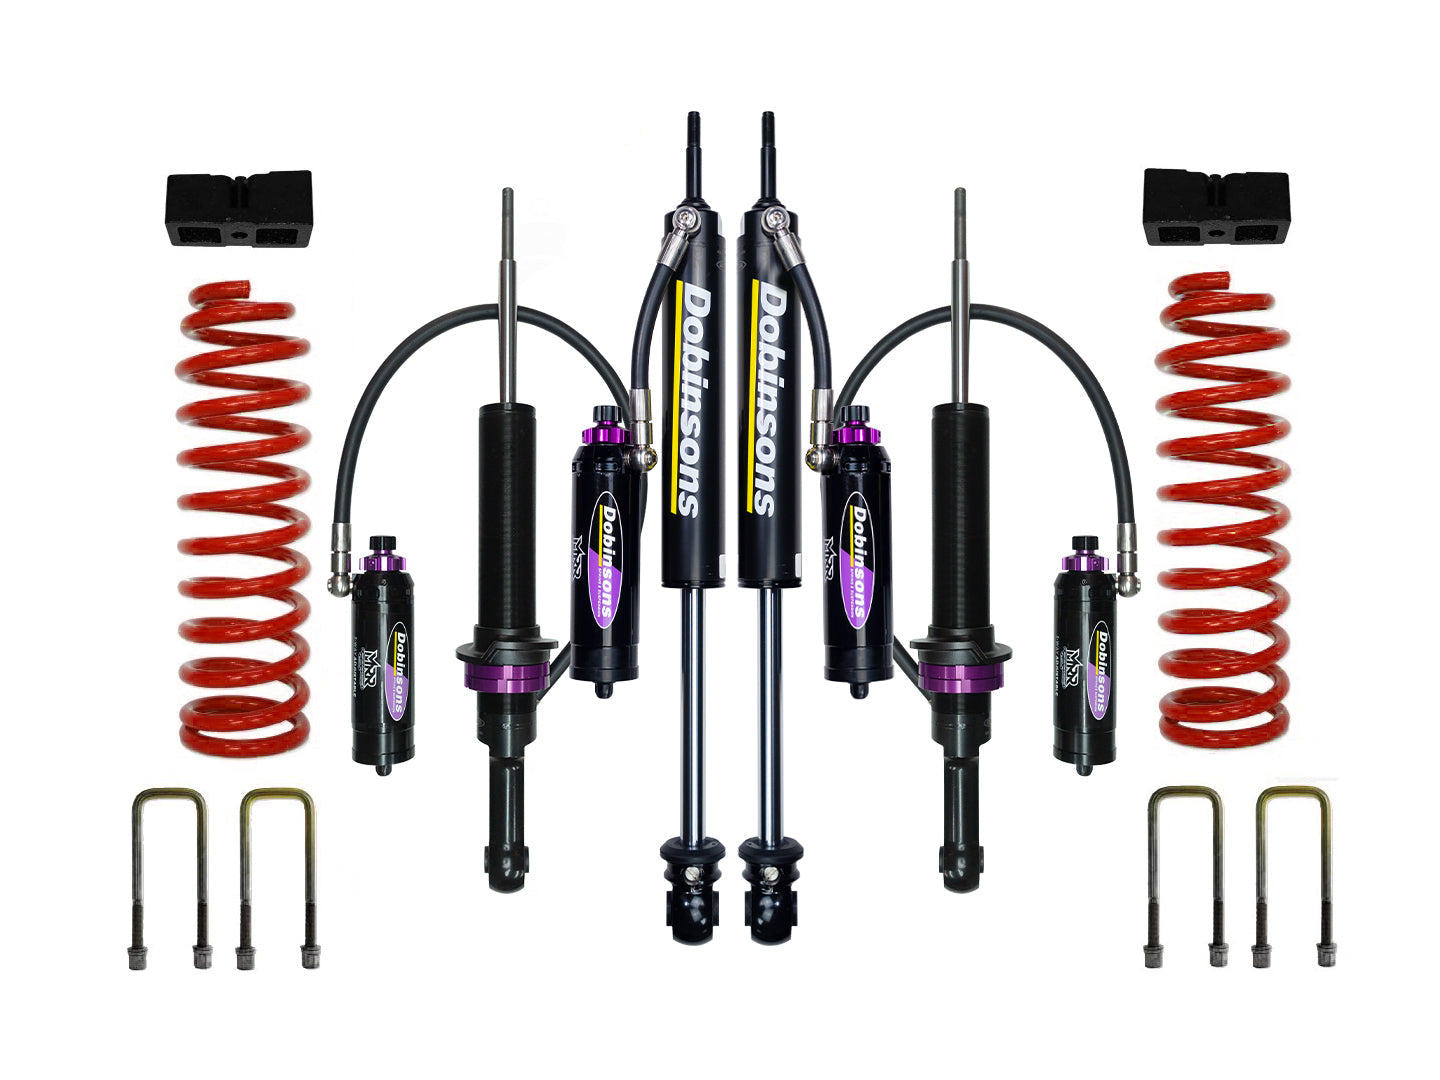 Dobinsons 1.75-3.0" MRR 3-way Adjustable Lift Kit Toyota Tacoma 2005-2022 with Quick Ride Rear